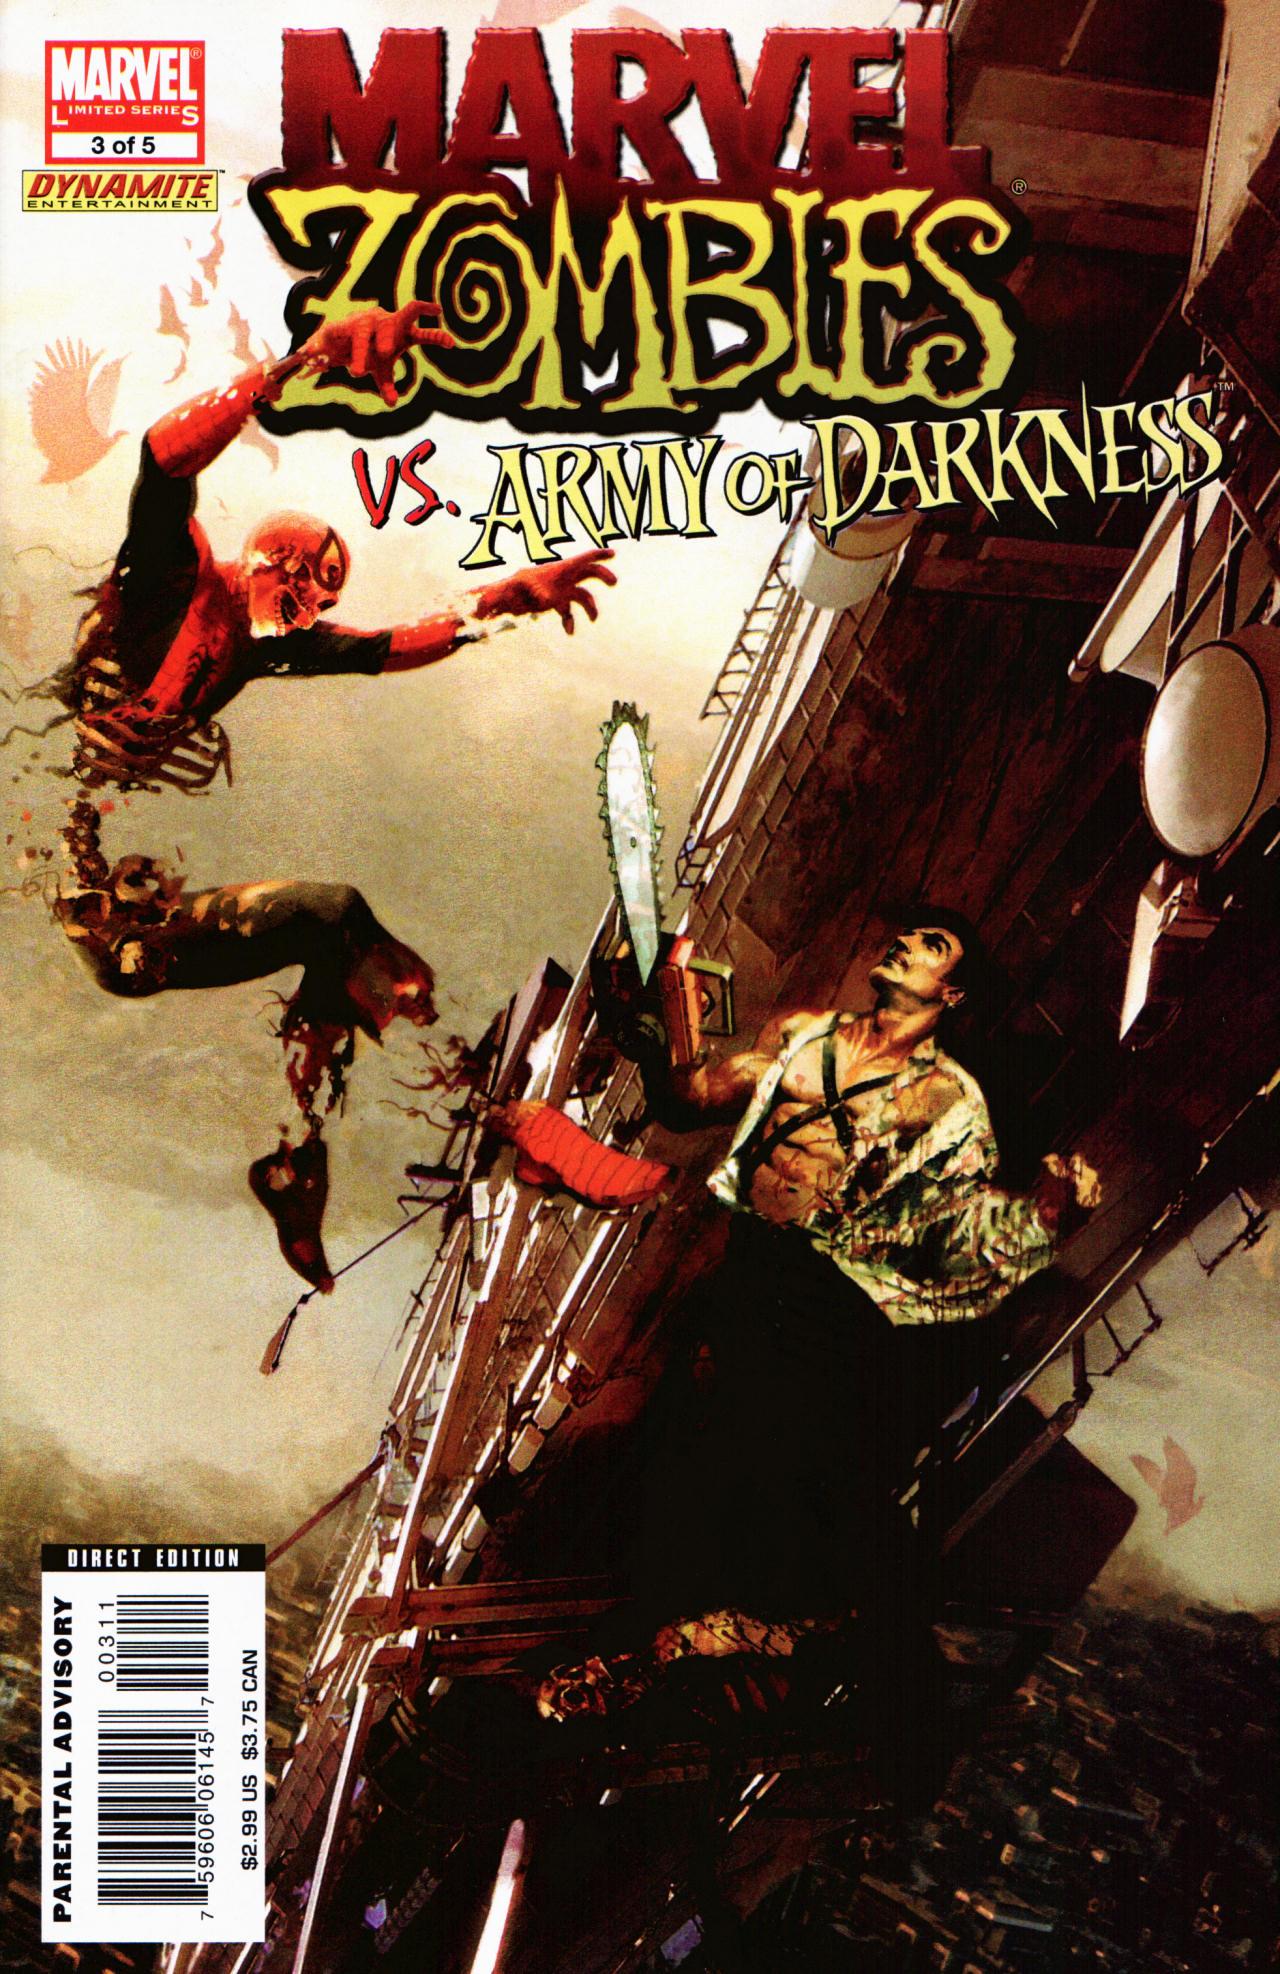 Marvel Zombies Vs. Army of Darkness Vol. 1 #3